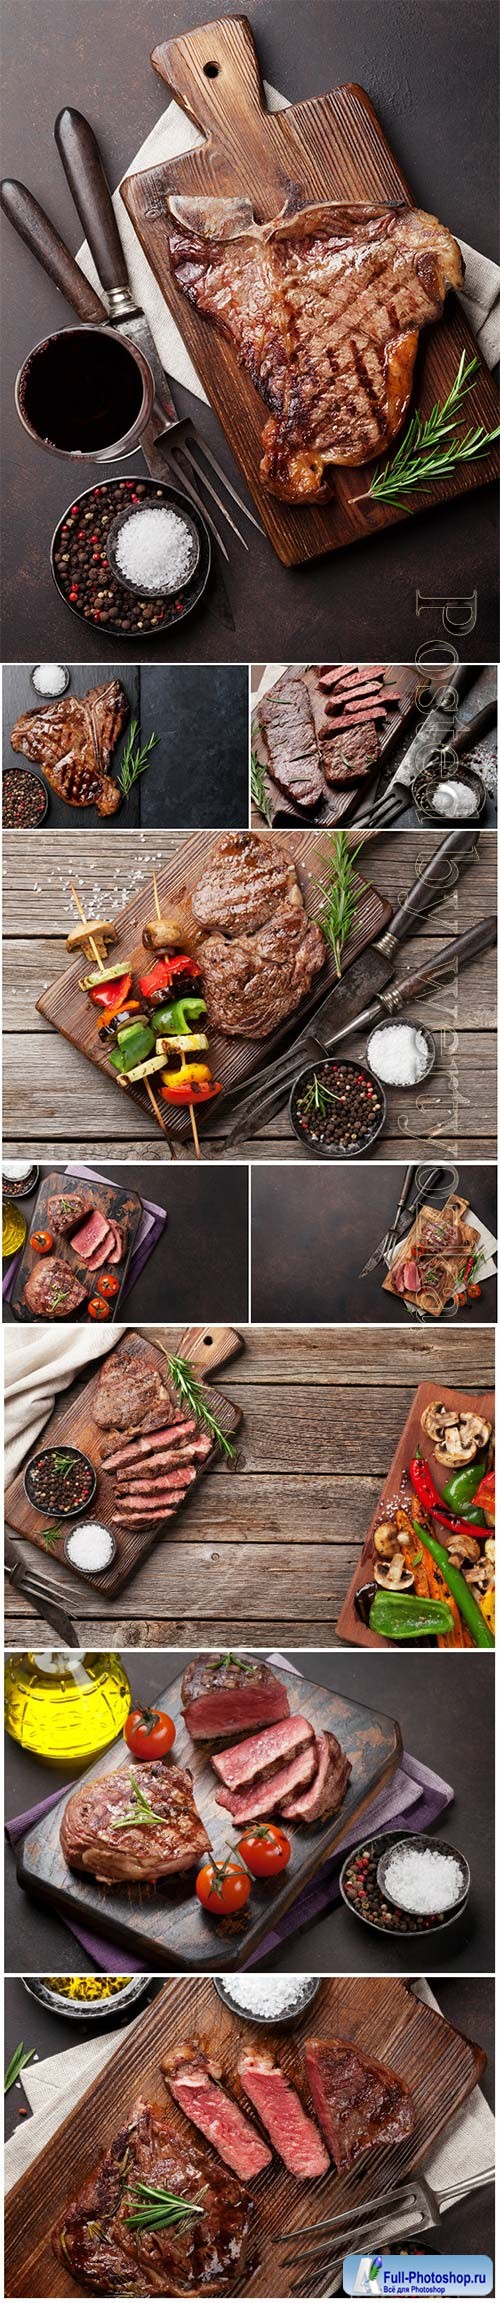 Beef steak and grilled beautiful stock photo